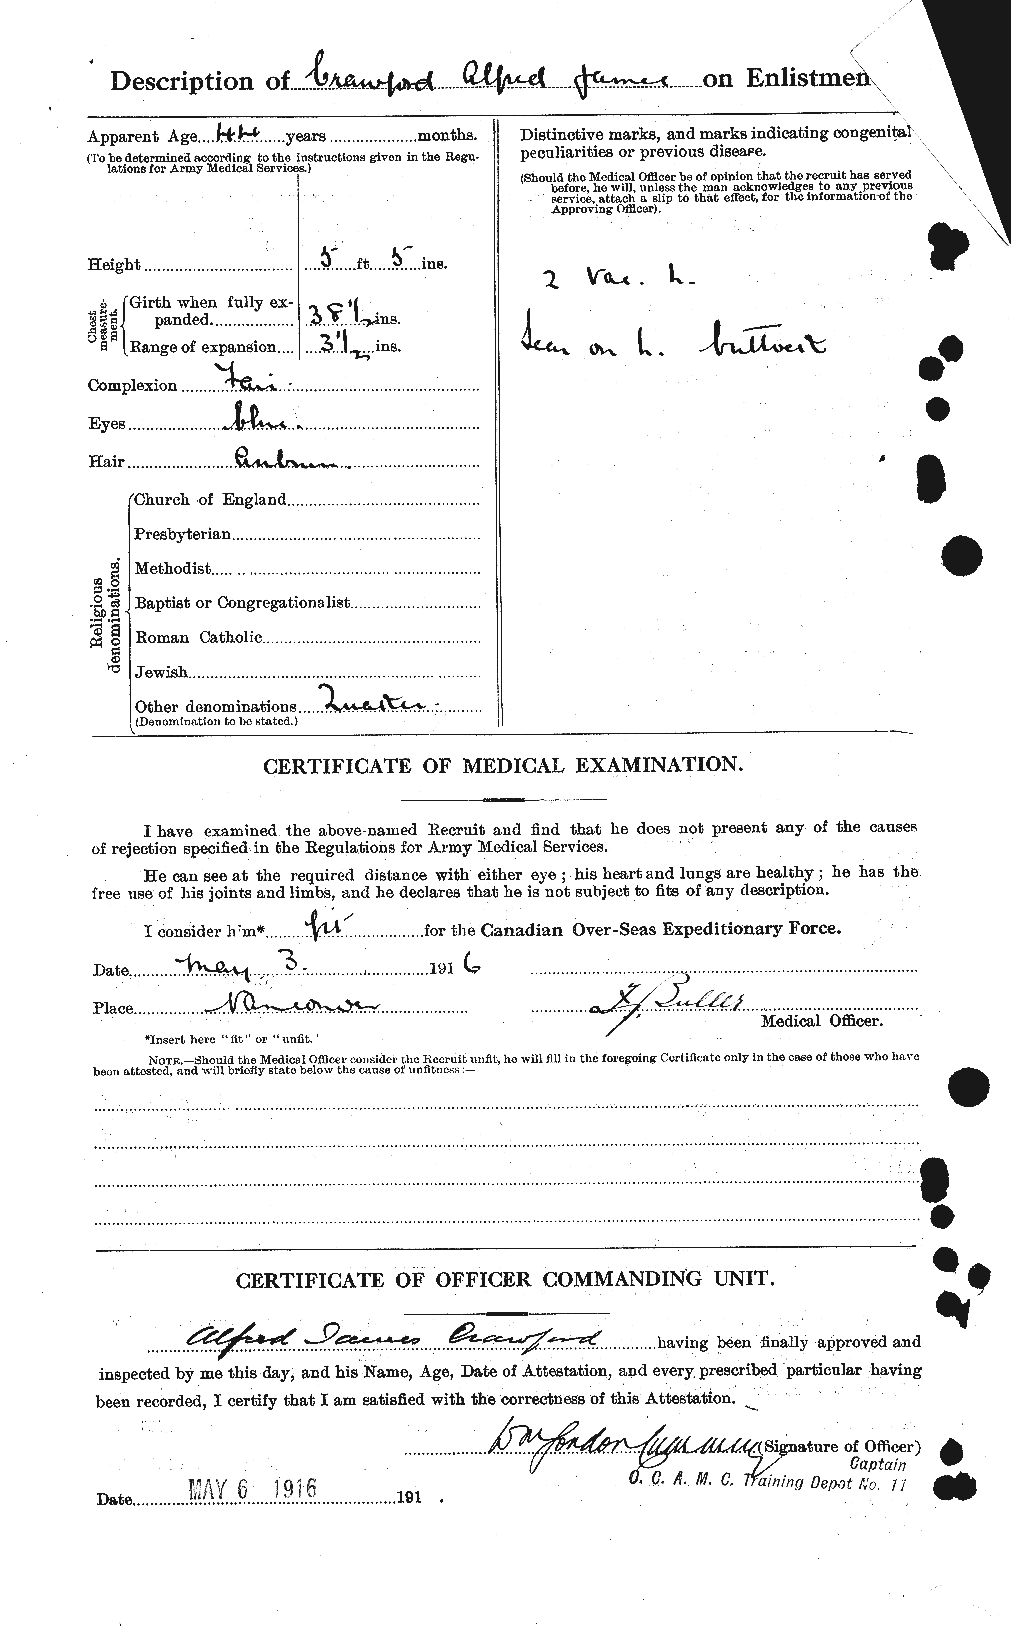 Personnel Records of the First World War - CEF 060953b